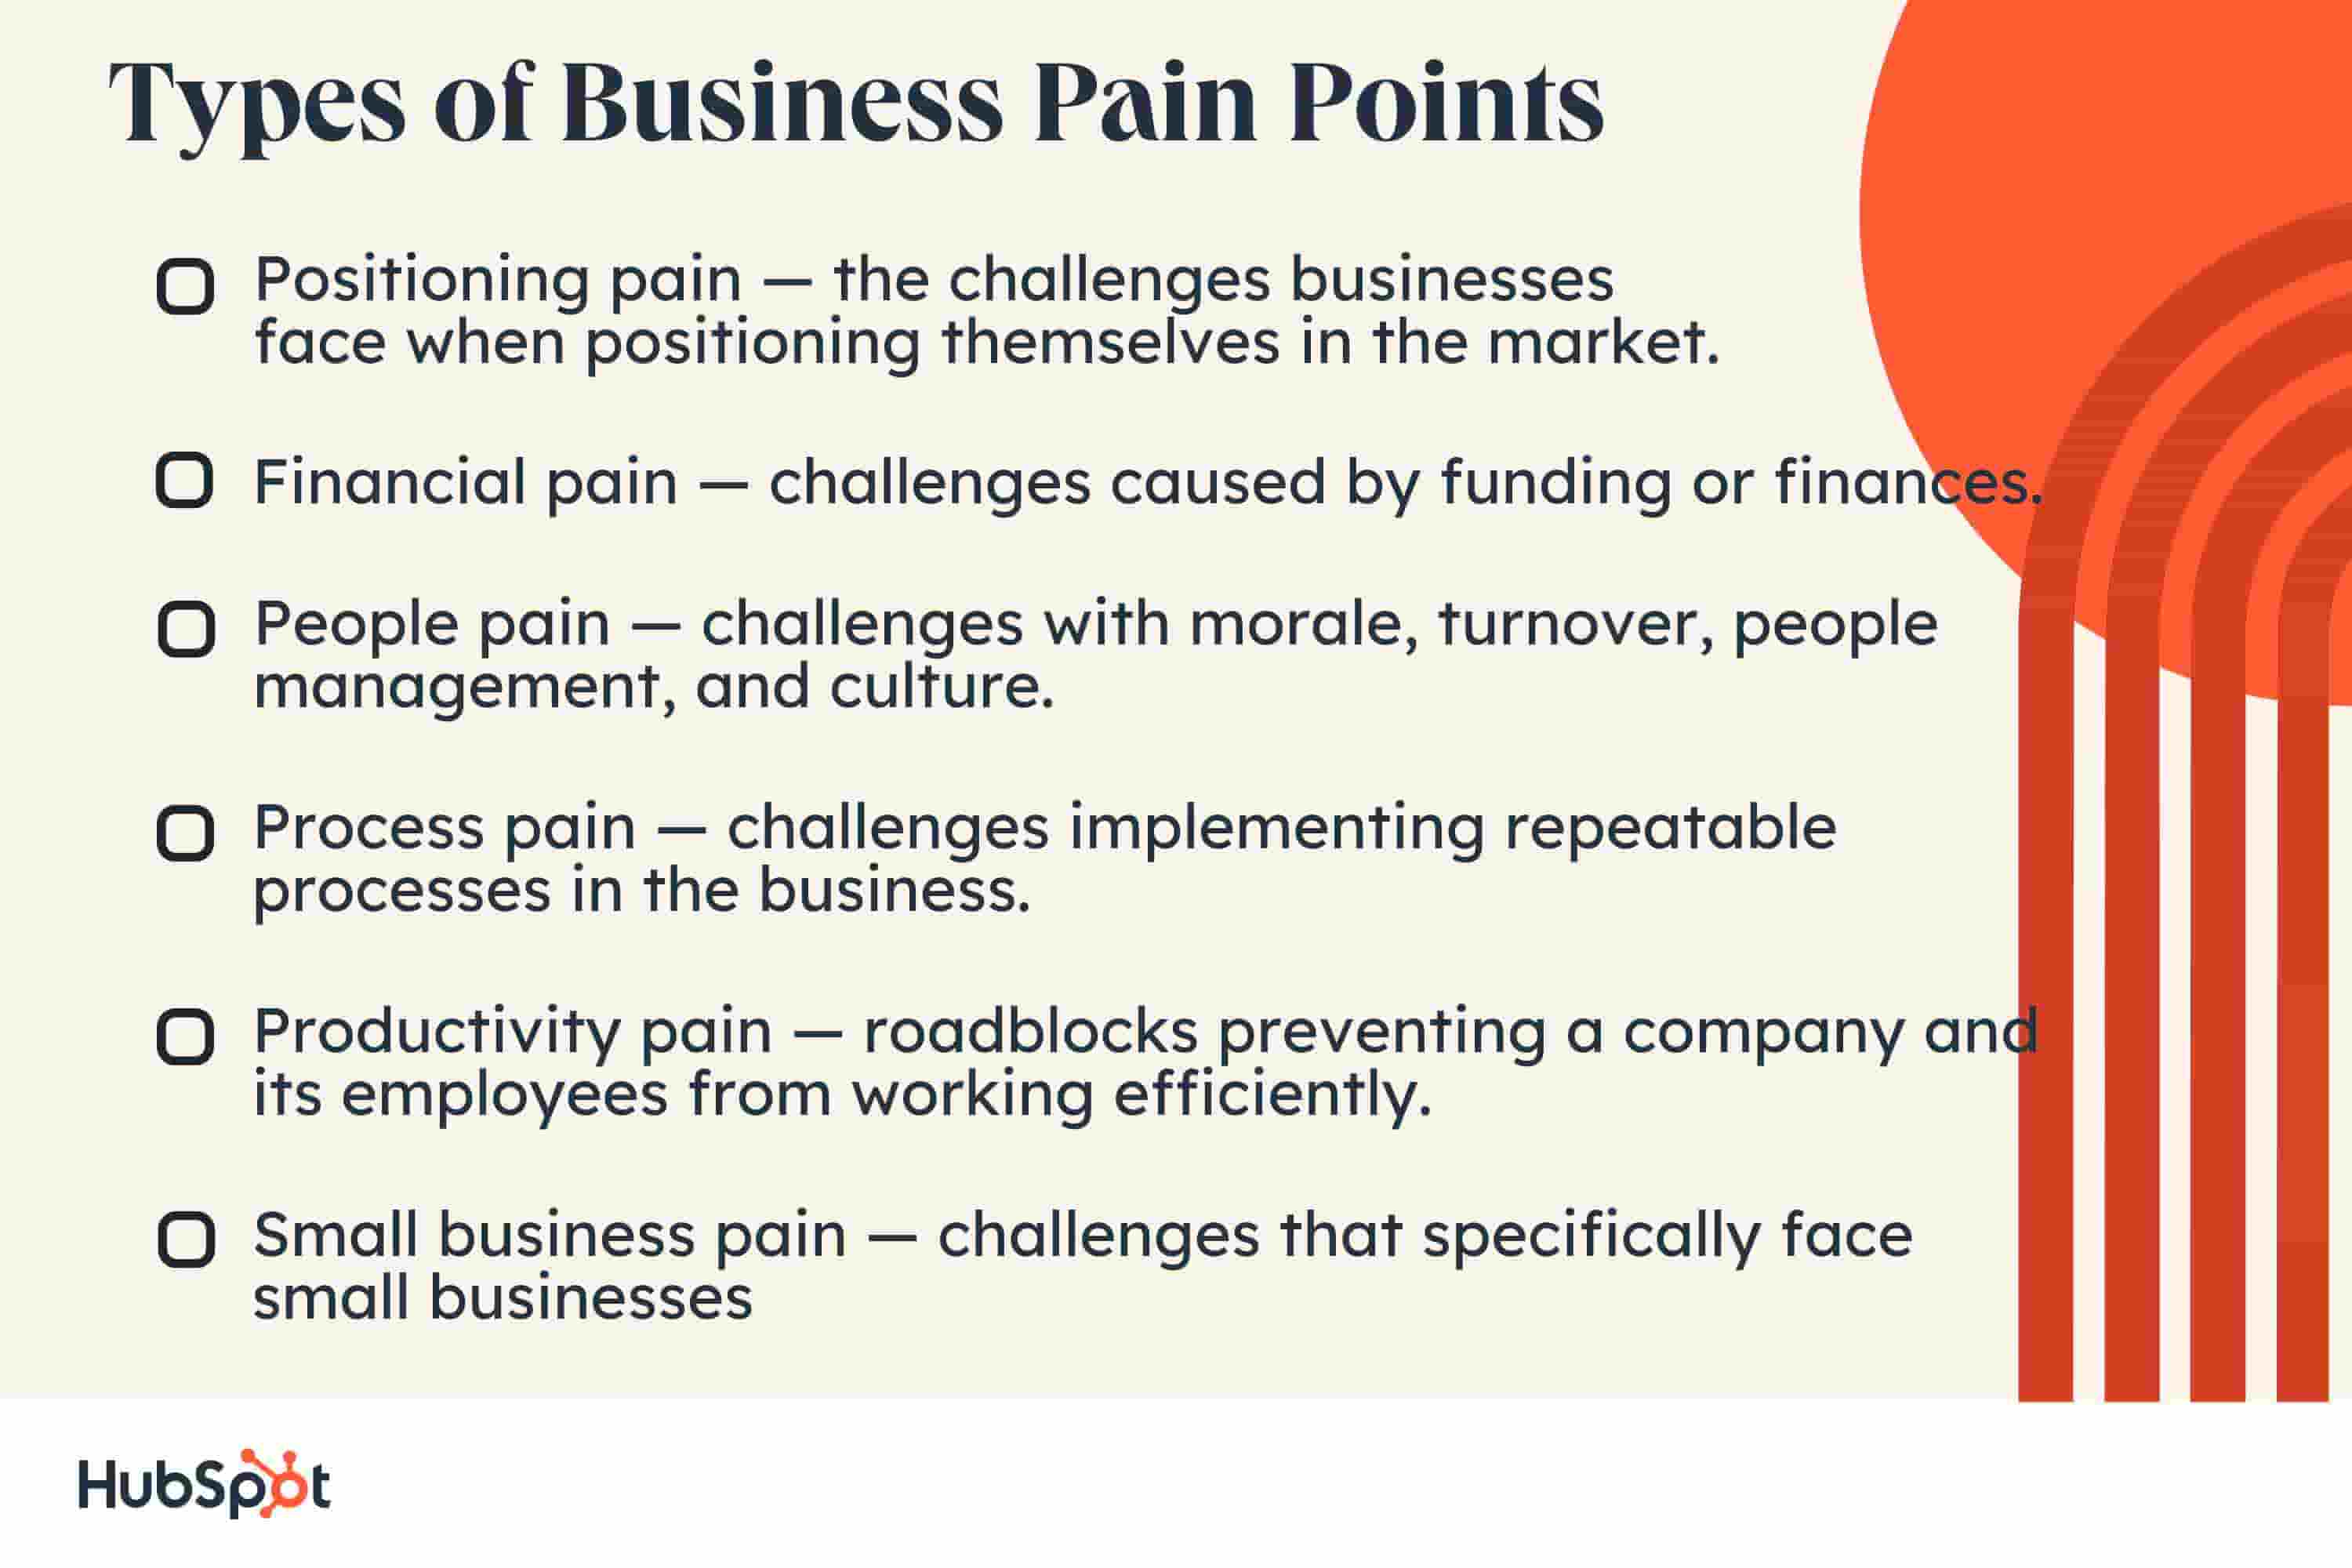 Types of Business Pain Points. Positioning pain — the challenges businesses face when positioning themselves in the market. Financial pain — challenges caused by finances. People pain — challenges with morale, turnover, people management, and culture. Process pain — challenges implementing repeatable processes in the business. Productivity pain — roadblocks preventing a company and its employees from working efficiently. Small business pain — challenges that specifically face small businesses